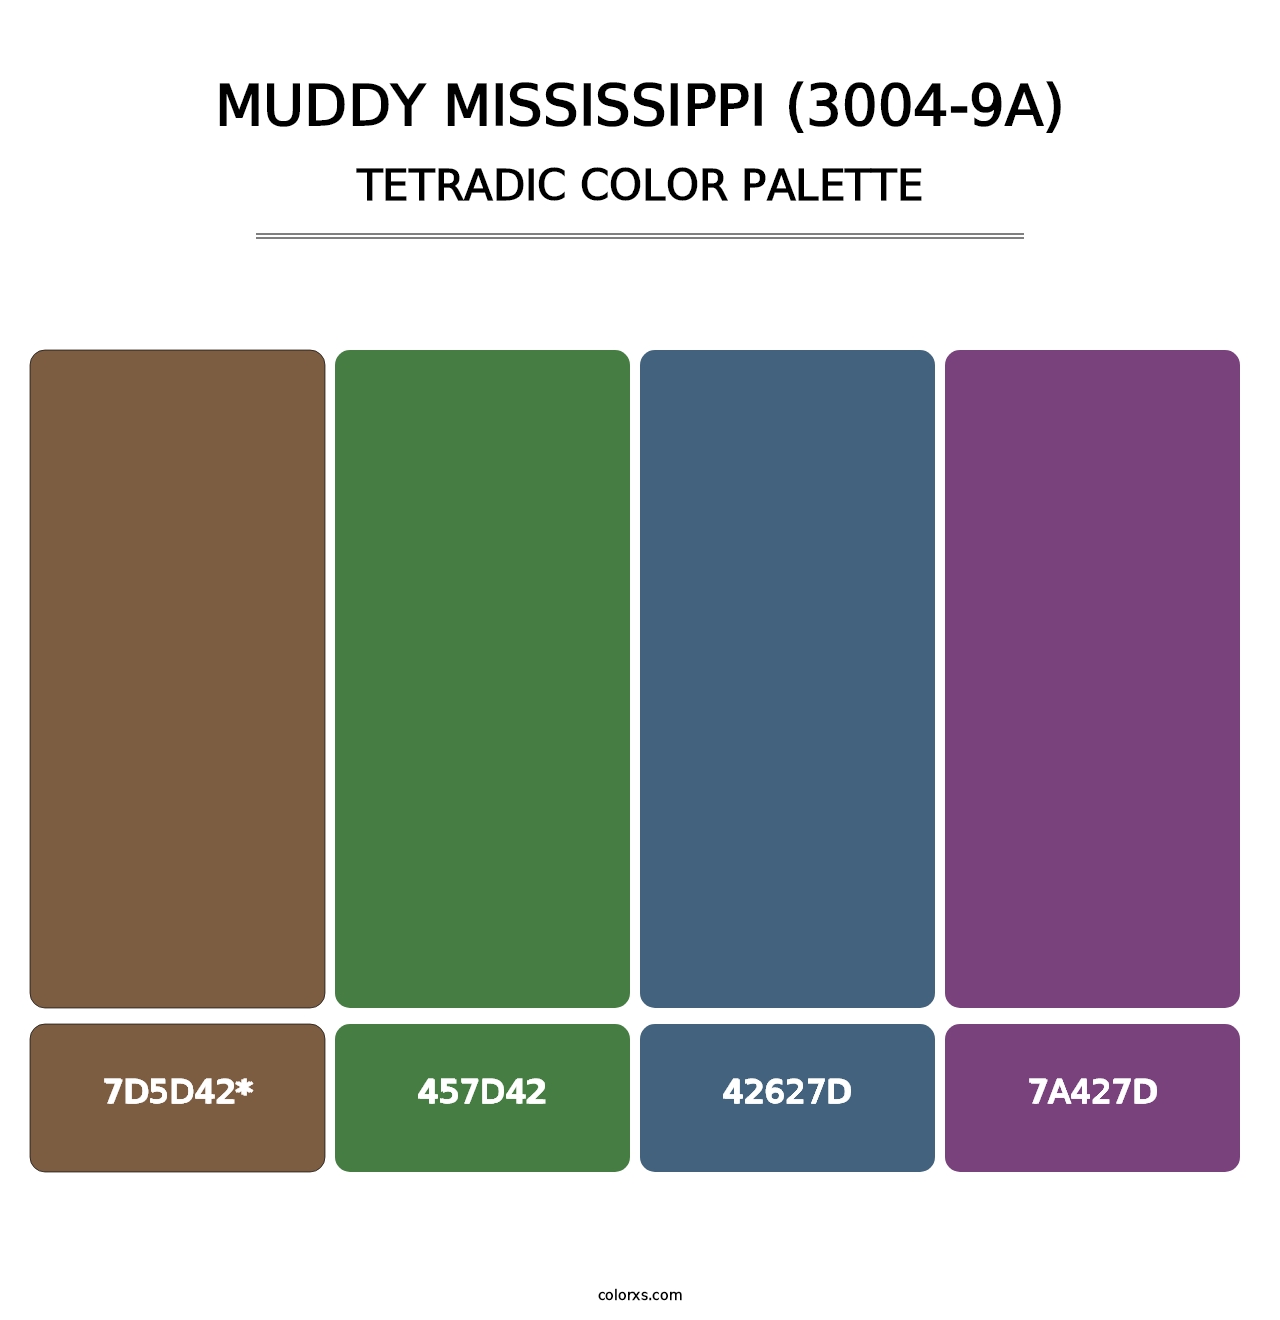 Muddy Mississippi (3004-9A) - Tetradic Color Palette